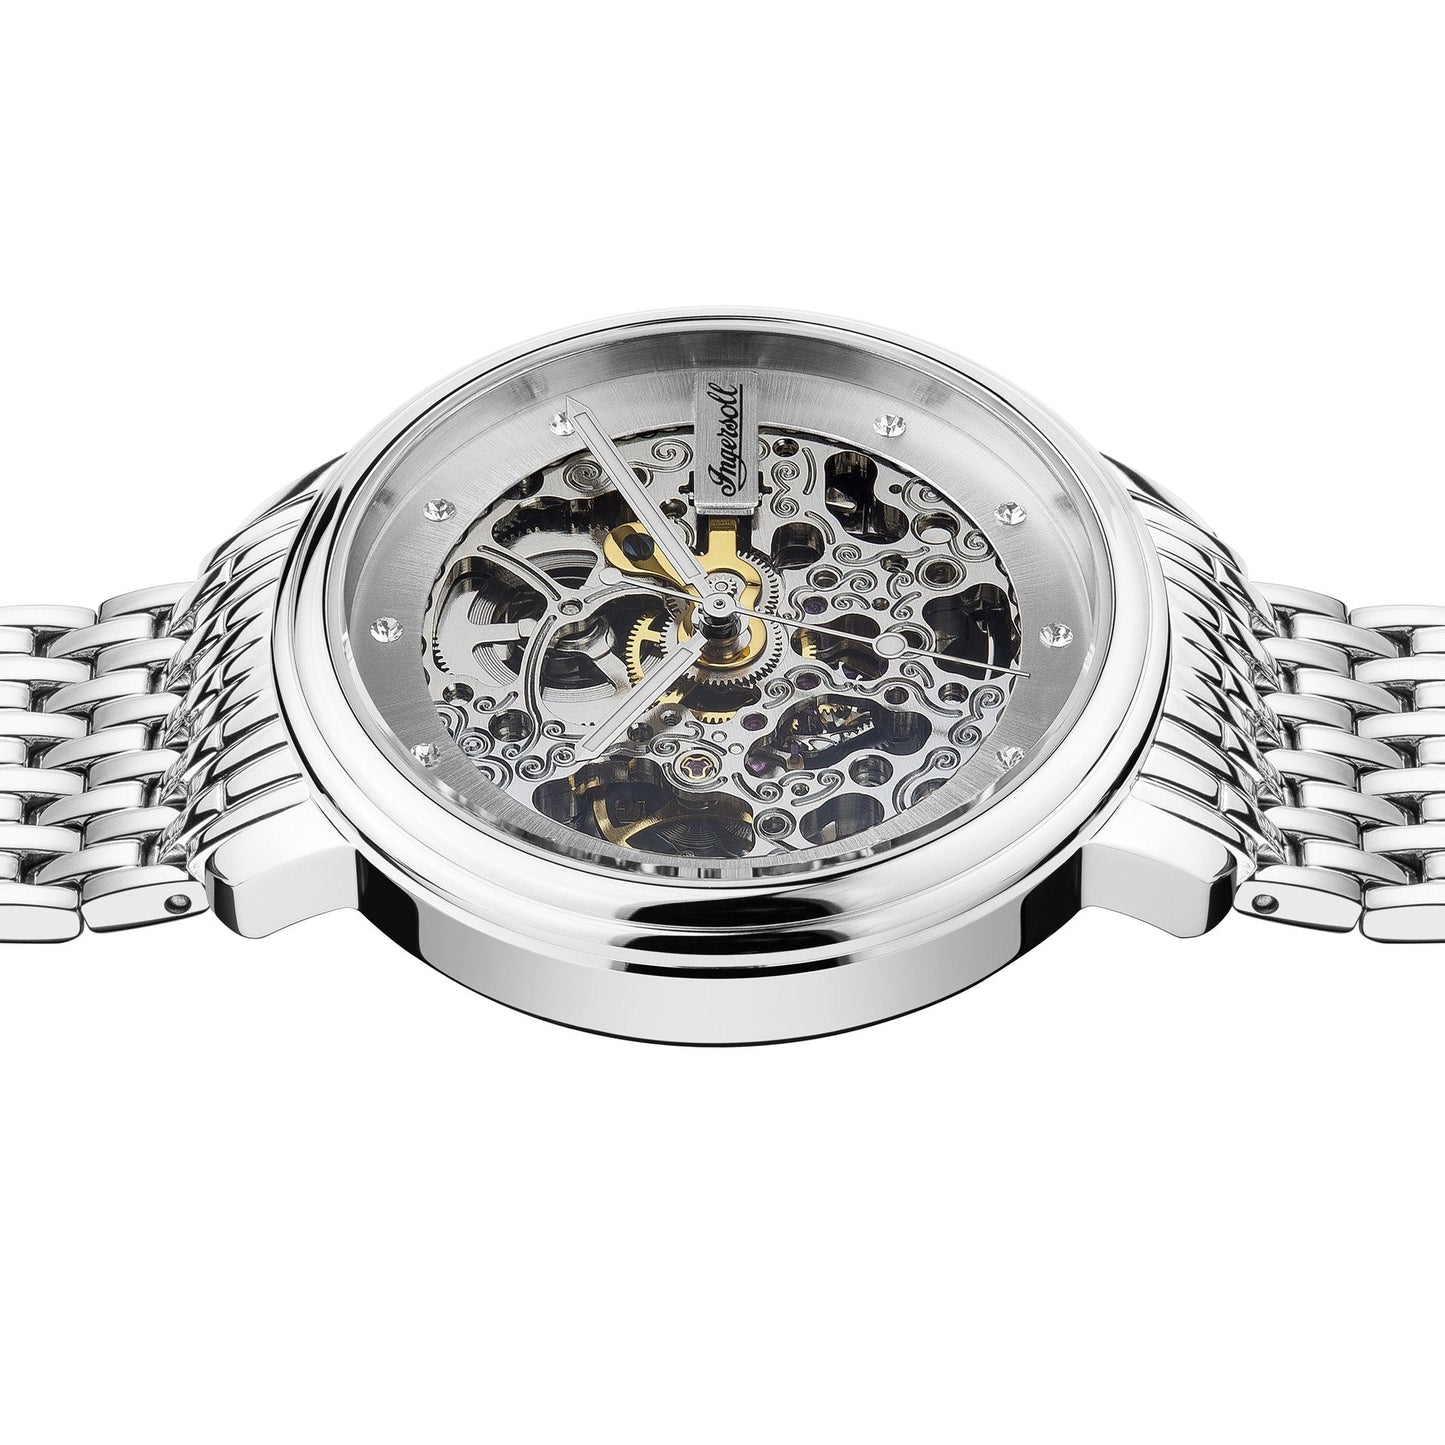 Ingersoll Crown Automatic Silver Watch